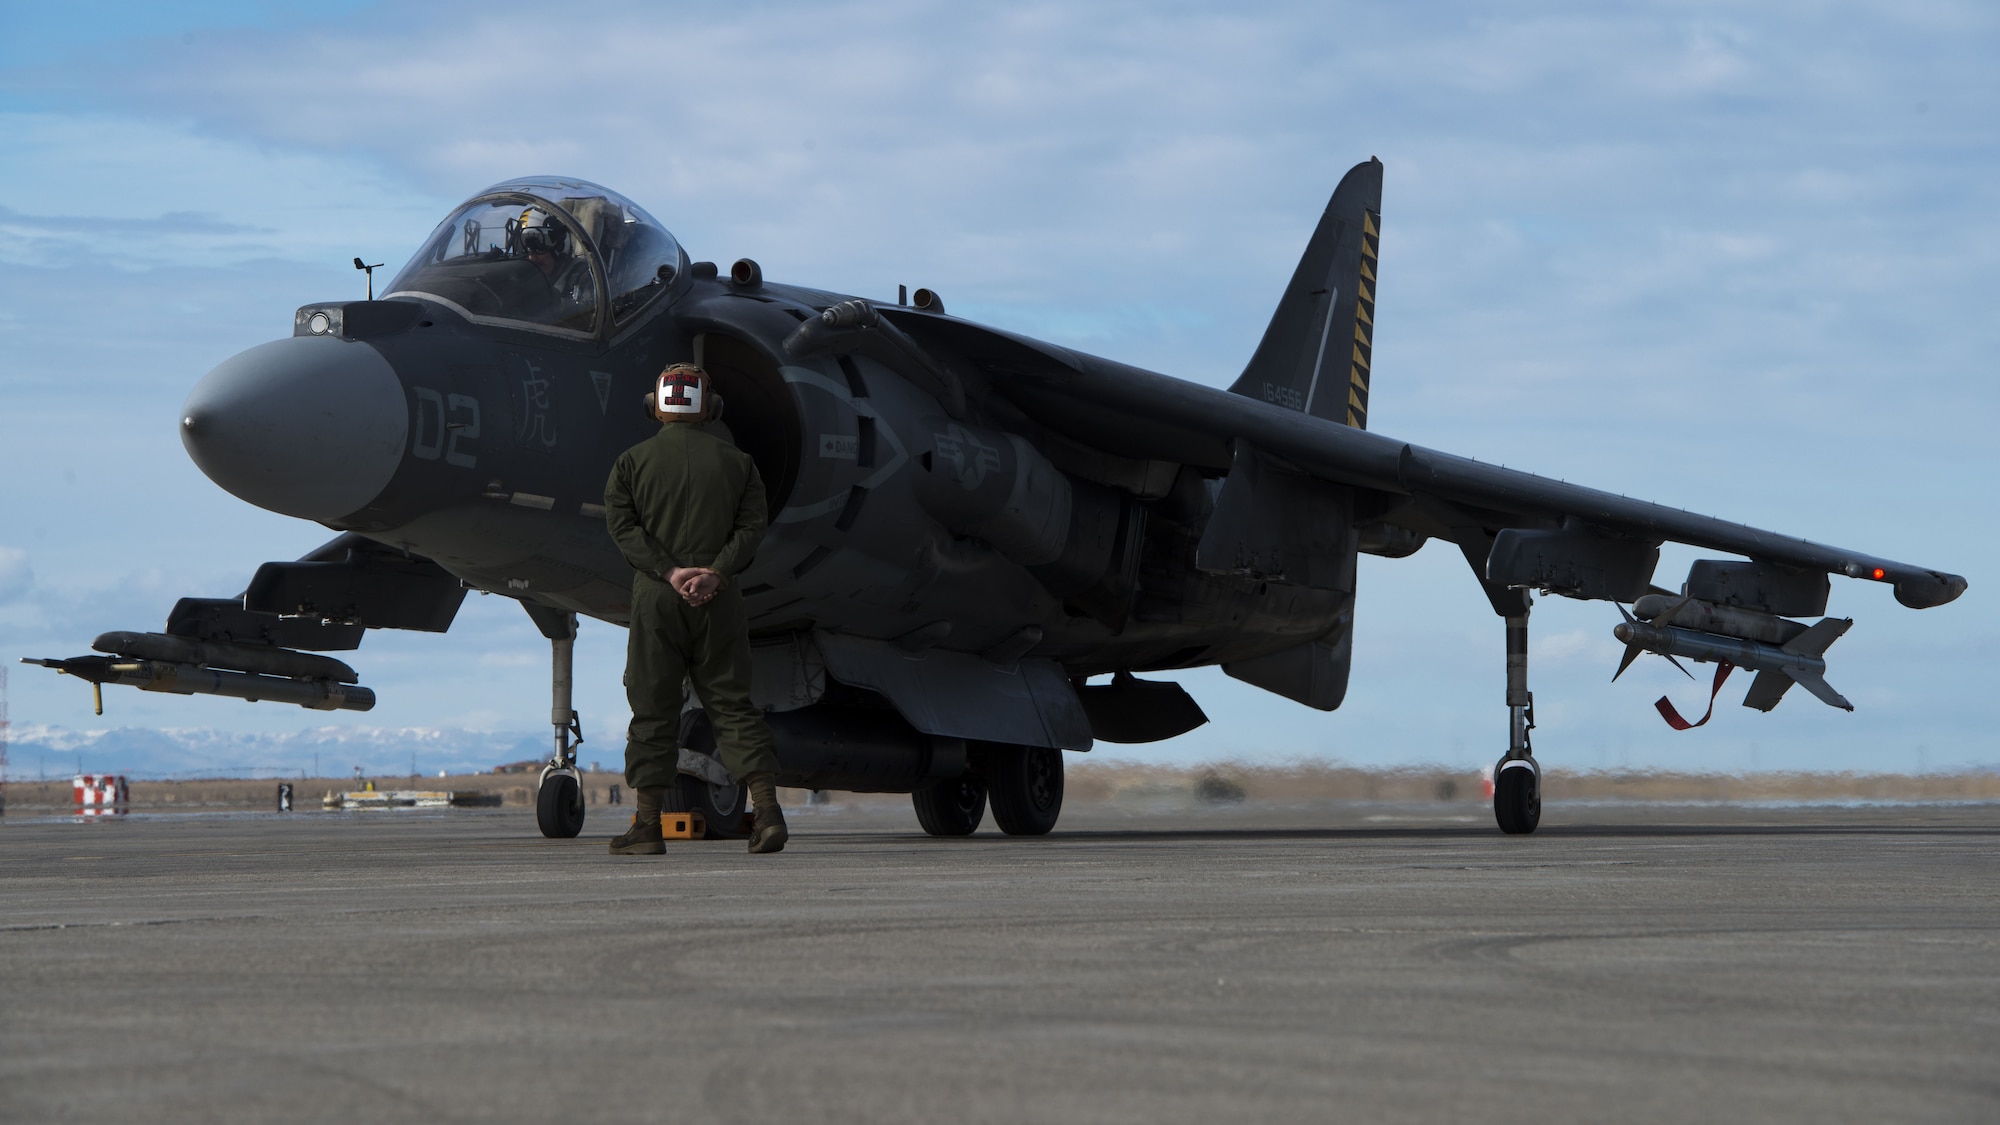 Corporal Tyler Fry, Marine Attack Squadron 542 powerline plane captain, walks around an AV-8B Harrier II during a pre-flight inspection Jan. 31, 2018, at Mountain Home Air Force Base, Idaho. Working in cold weather conditions and side-by-side with the Air Force will help VMA-542 train for its mission. (U.S. Air Force Photo by Airman 1st Class JaNae Capuno)